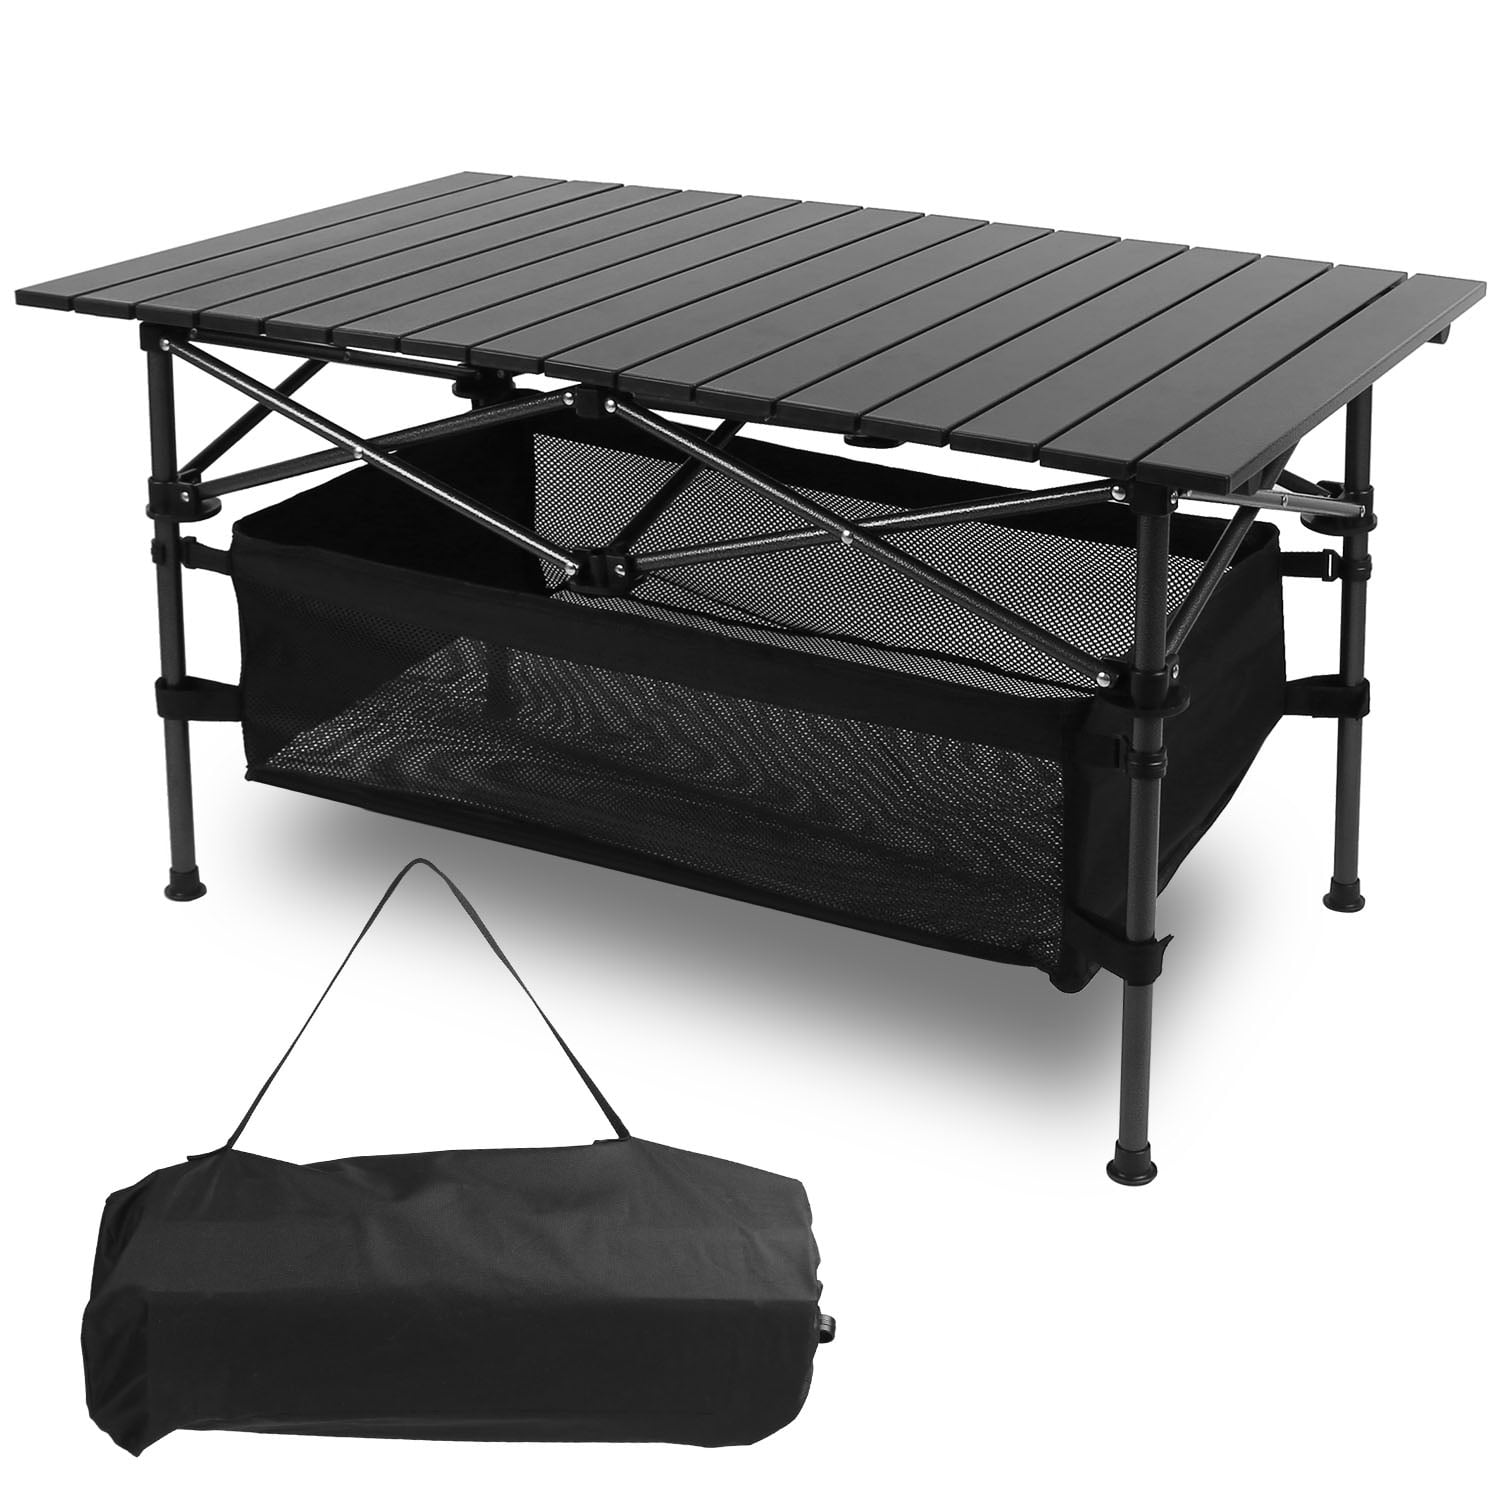 WUROMISE Sanny Outdoor Folding Portable Picnic Camping Table, Aluminum  Roll-up Table with Easy Carrying Bag for Indoor,Outdoor,Camping